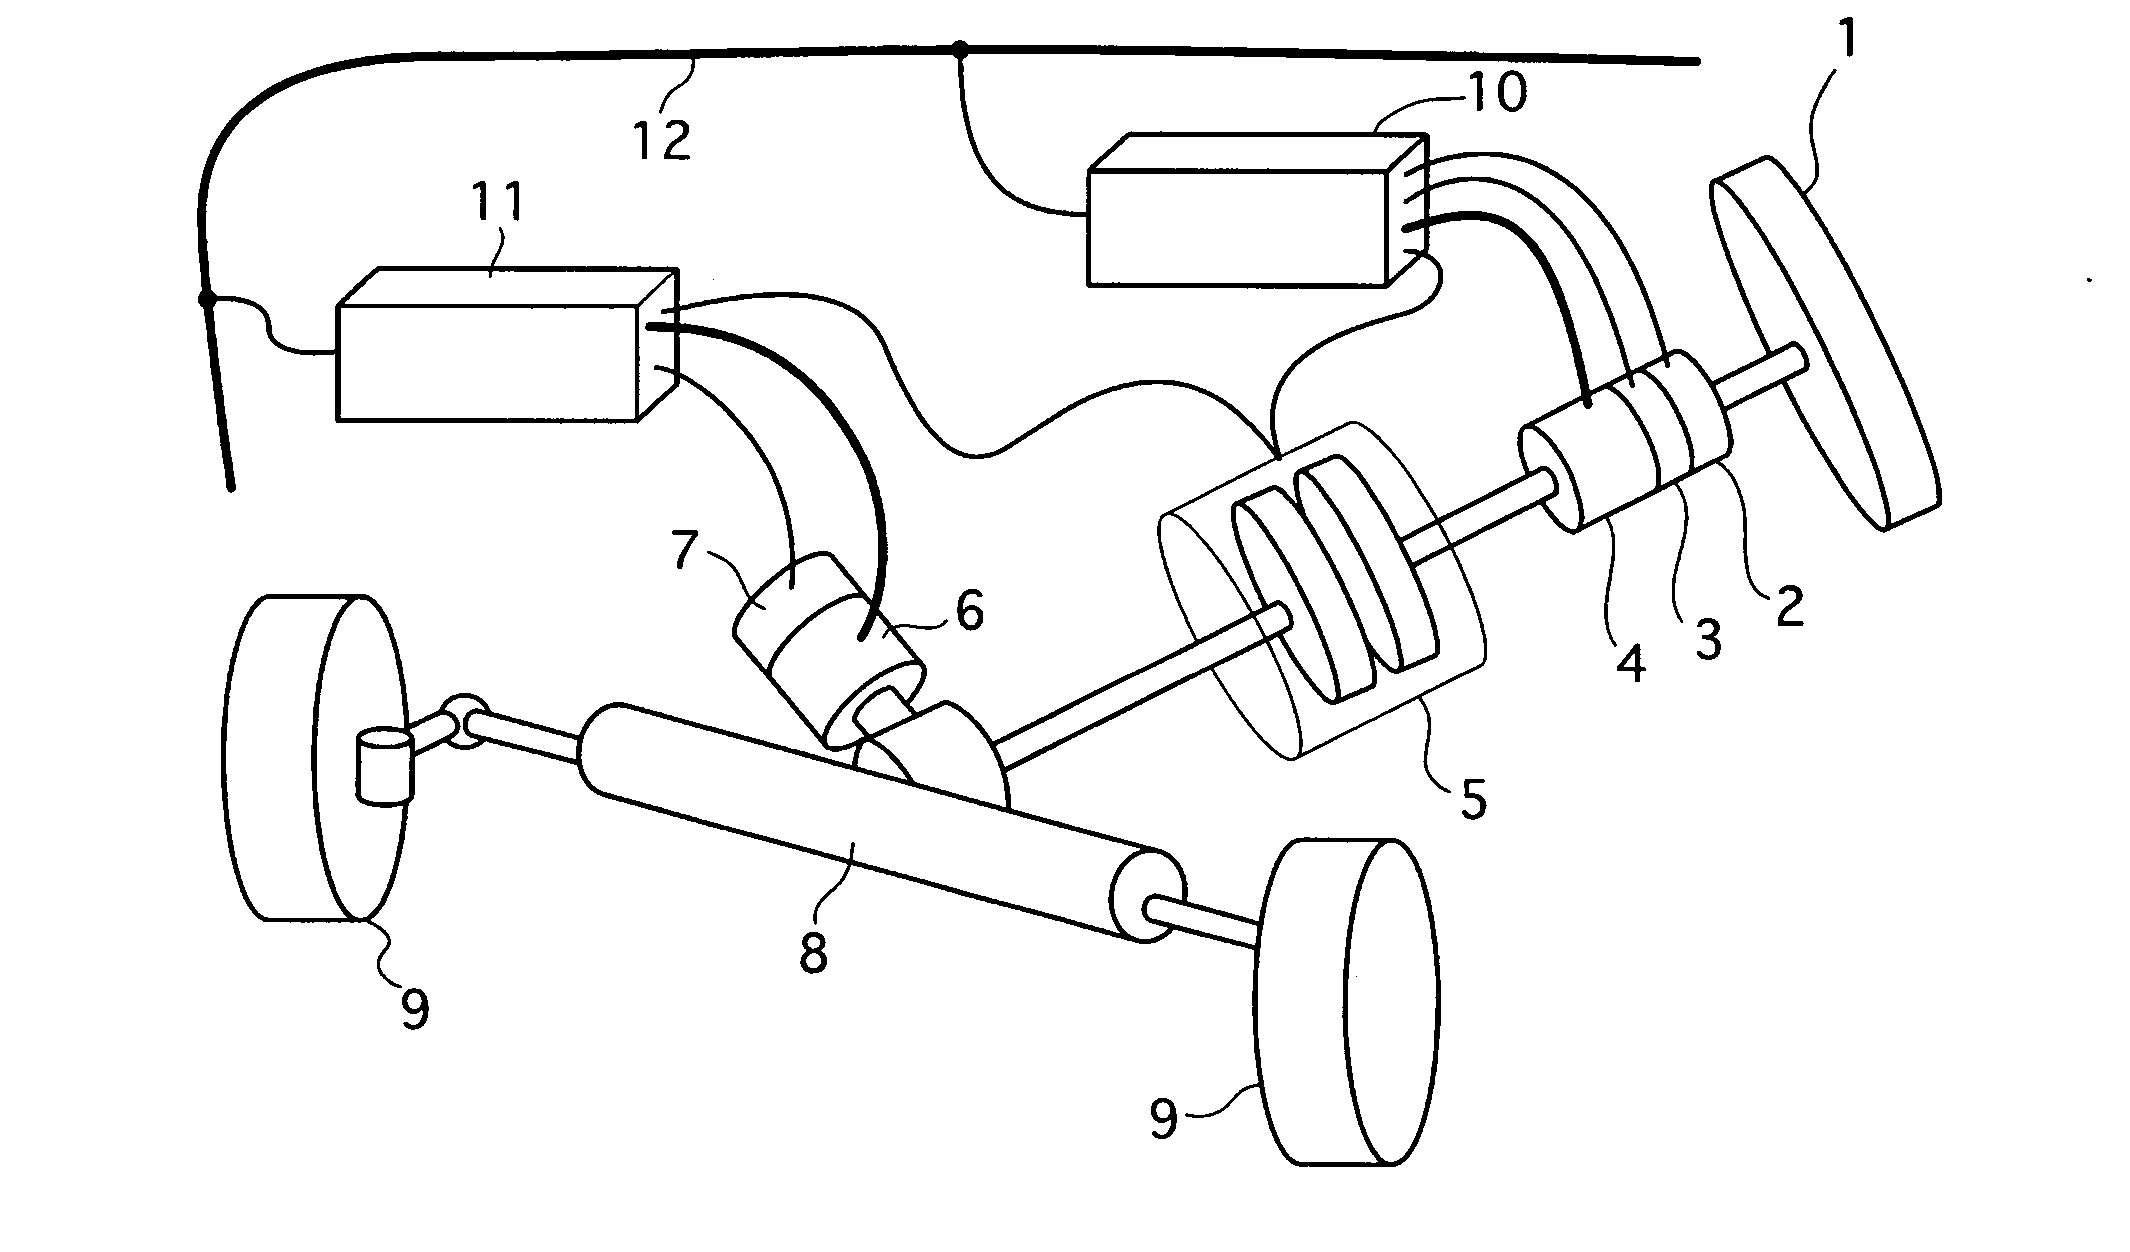 Vehicle steering control apparatus and method